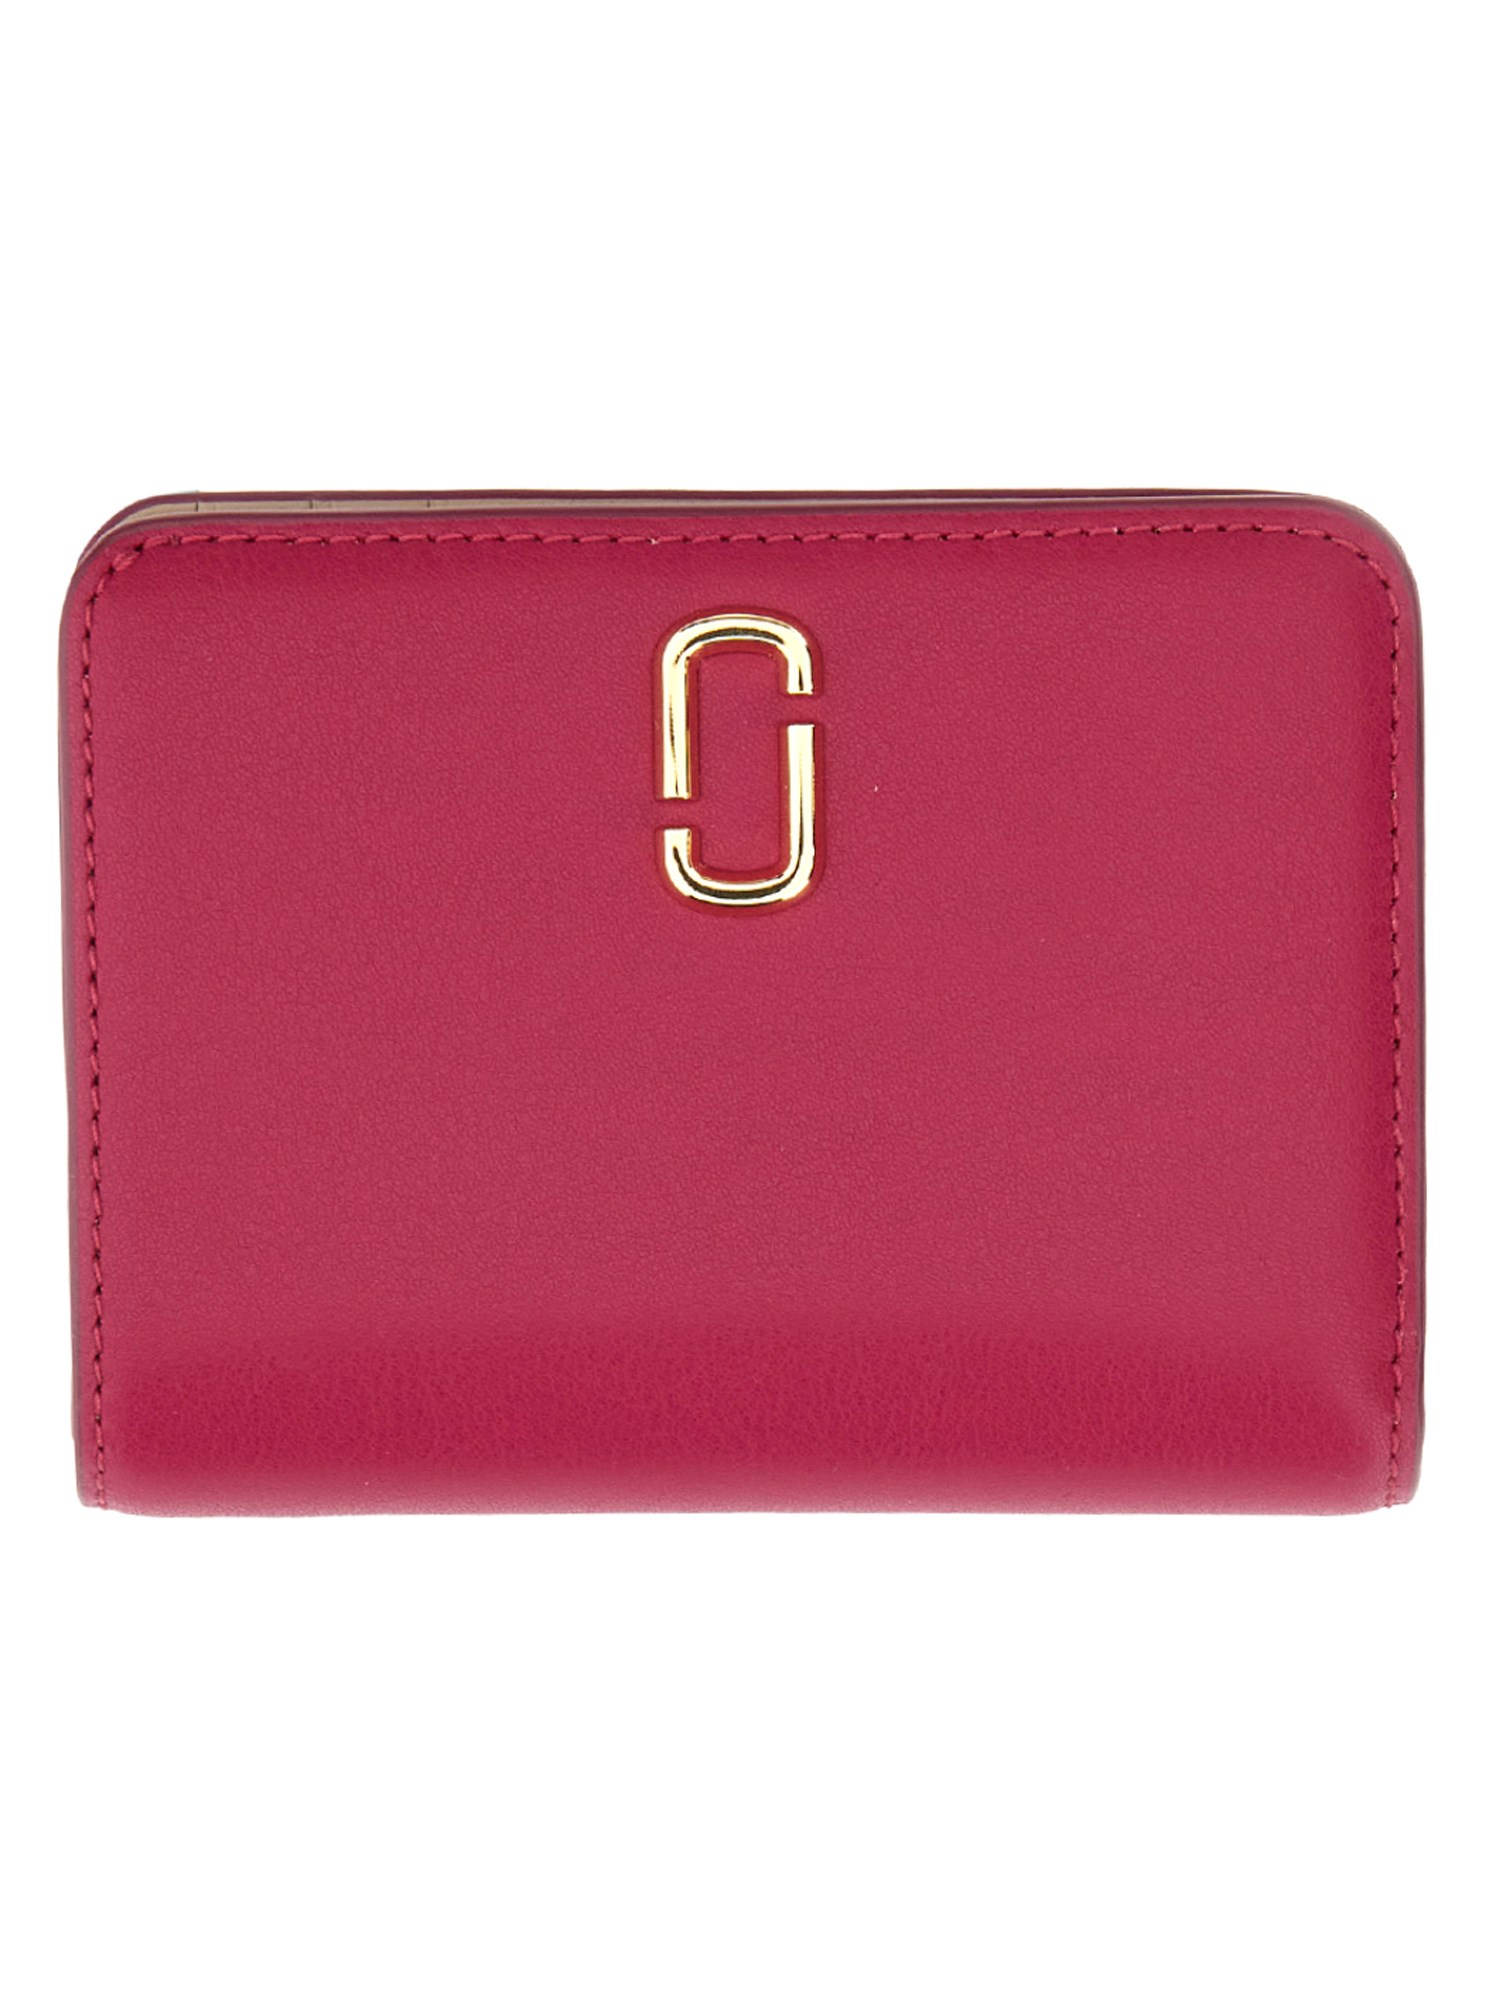 marc jacobs compact wallet 